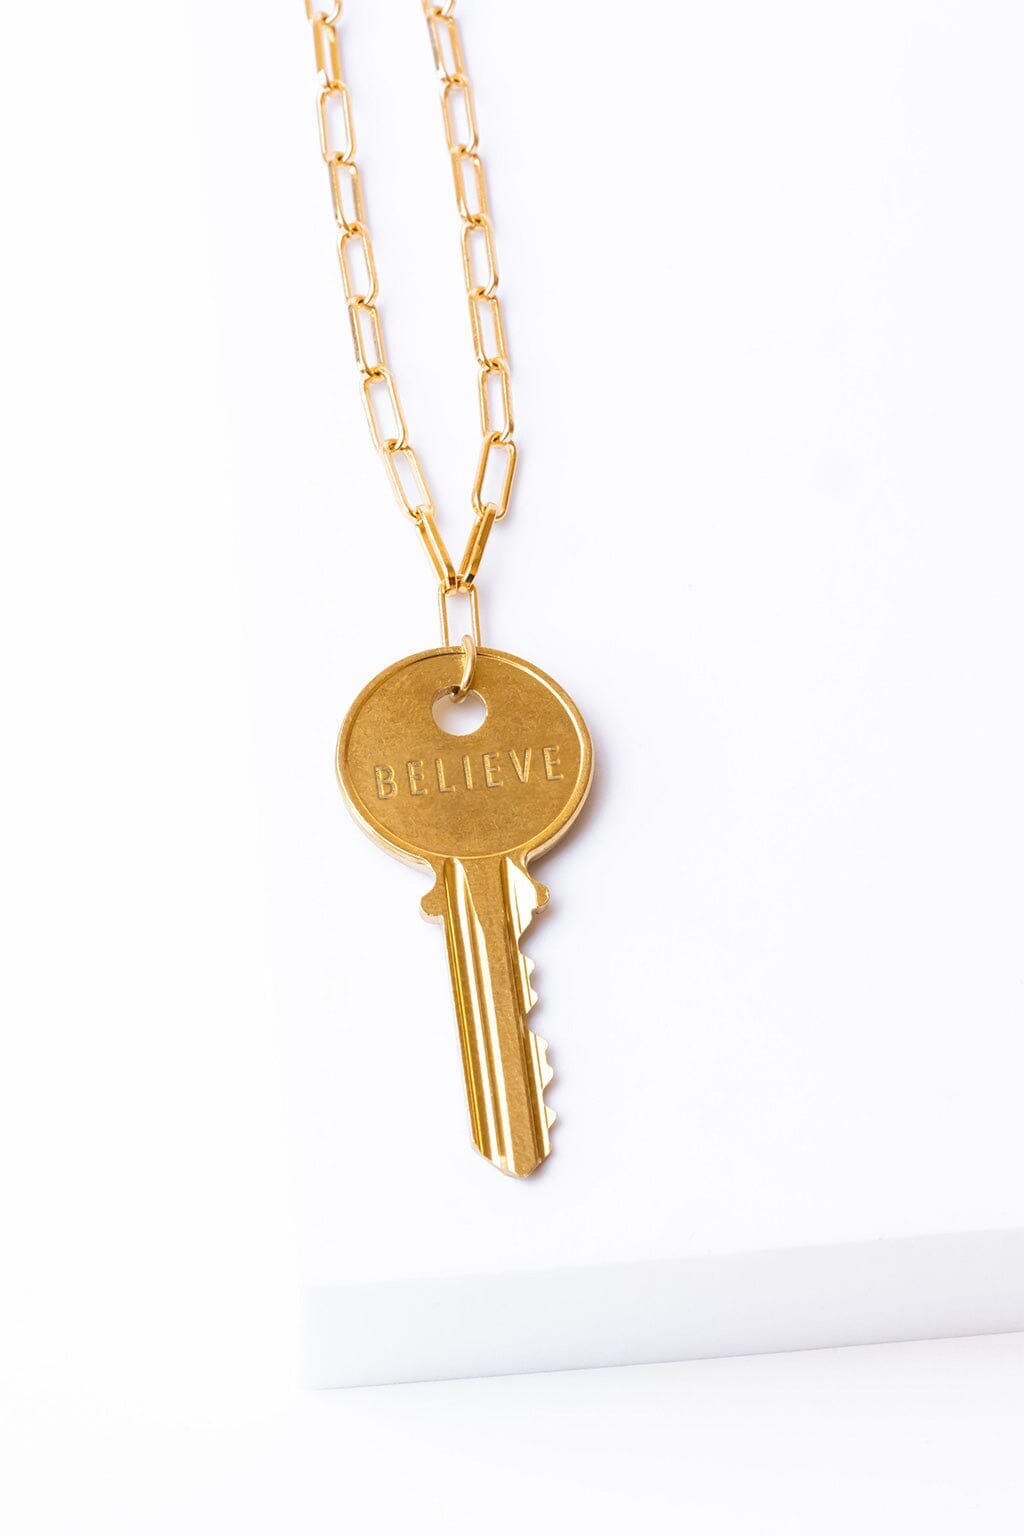 N - Brooklyn Classic Key Necklace Necklaces The Giving Keys Gold 